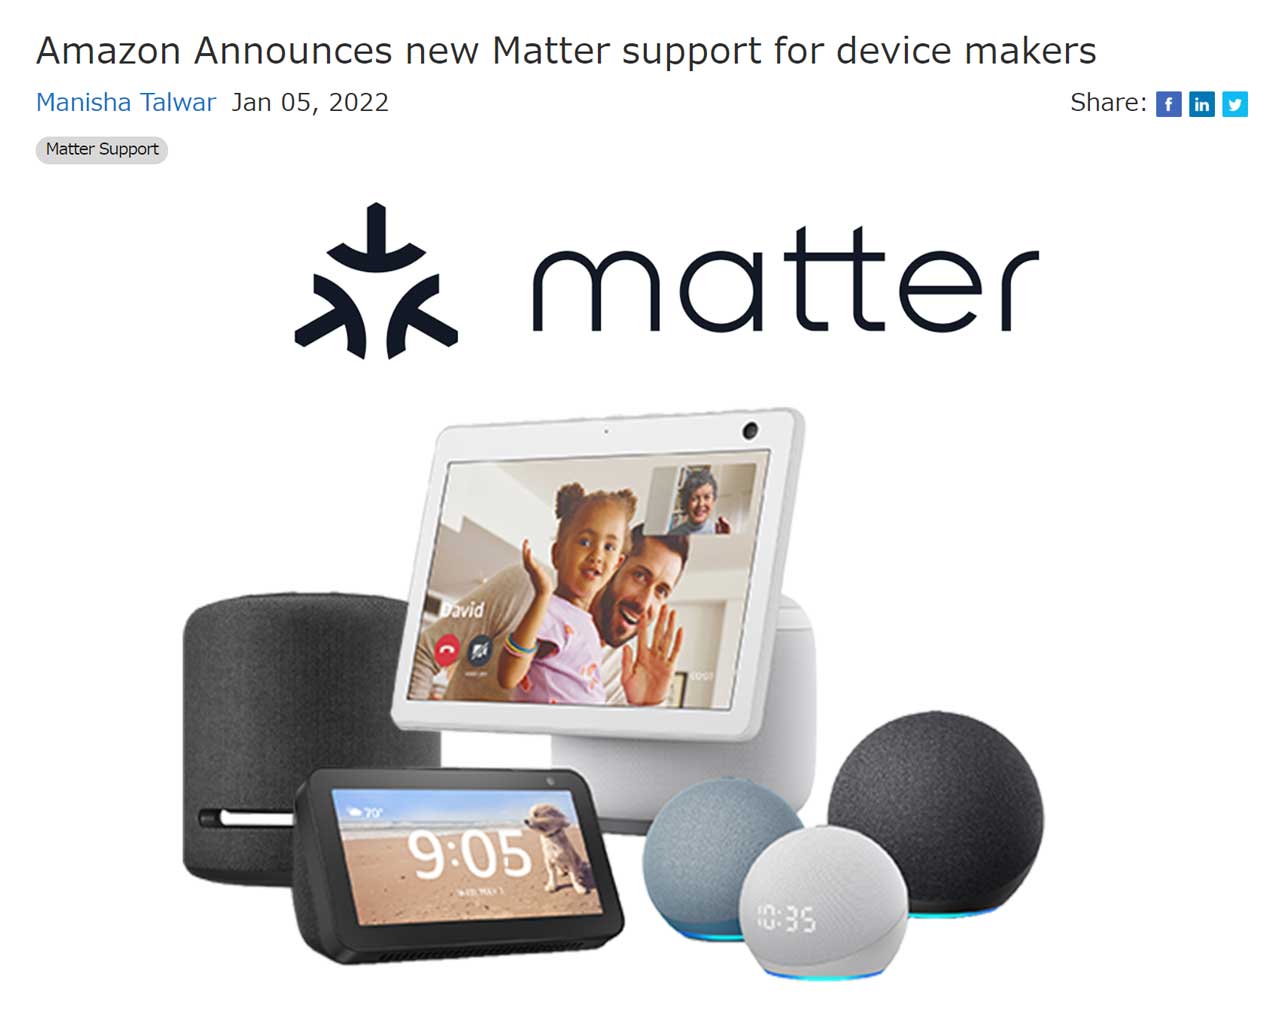 Amazon Announces new Matter support for device makers